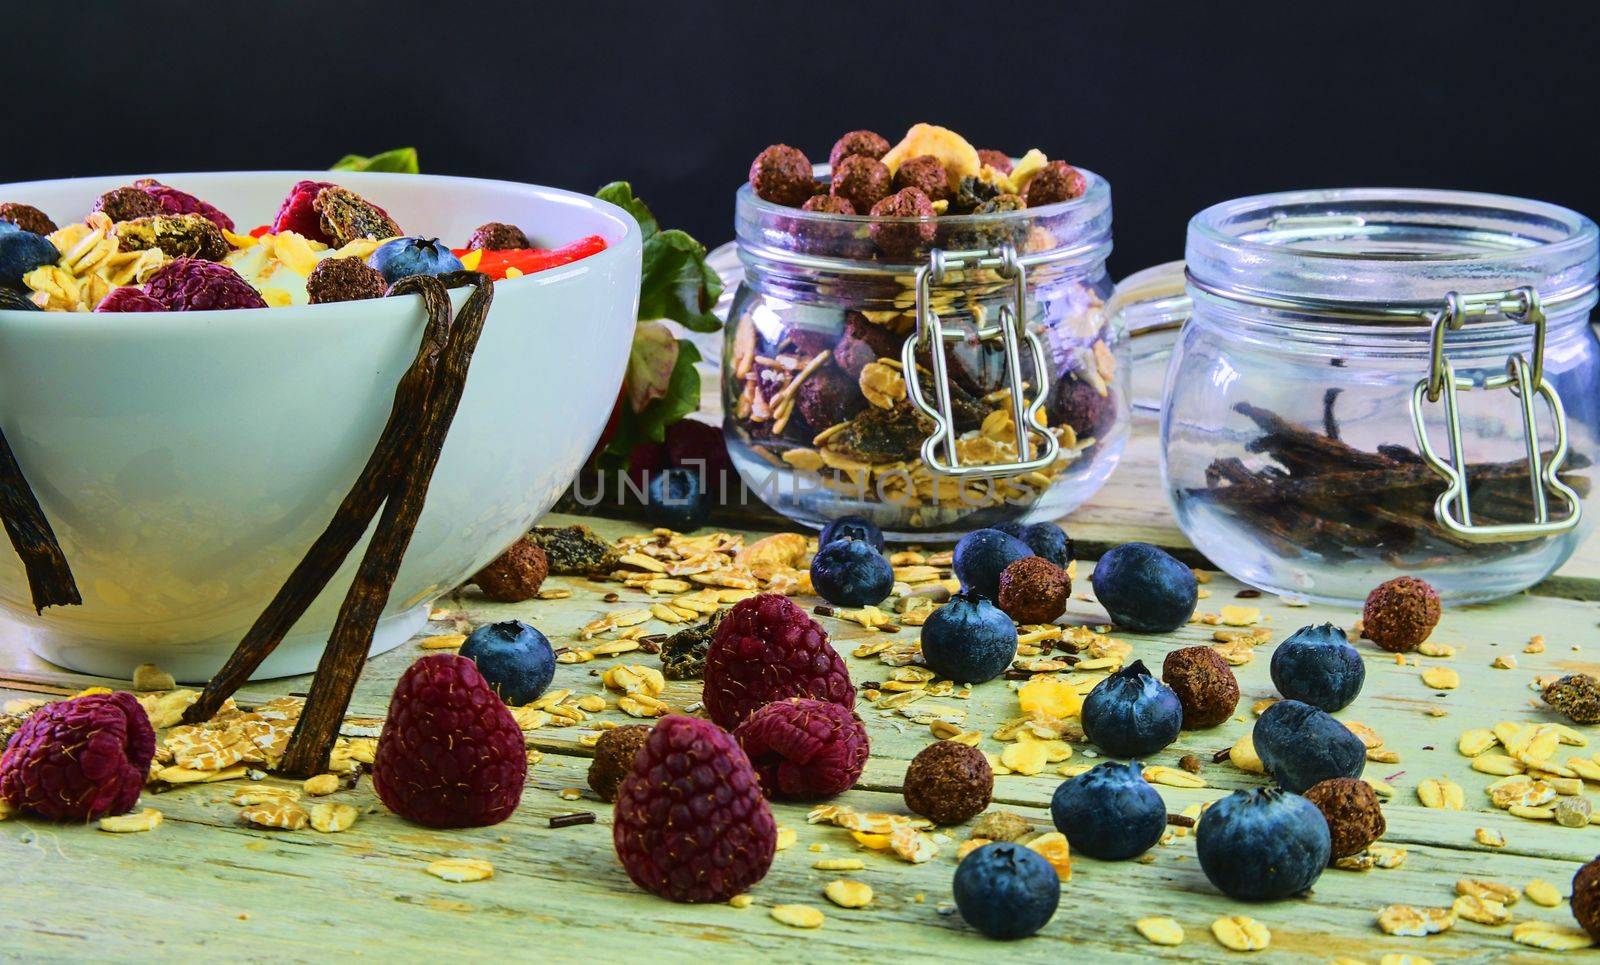 Healthy breakfast, cereal with yoghurt, strawberries, blueberries, raspberries and muesli on wooden rustic background.  Concept of: fitness, diet, wellness and breakfasts by roman_nerud